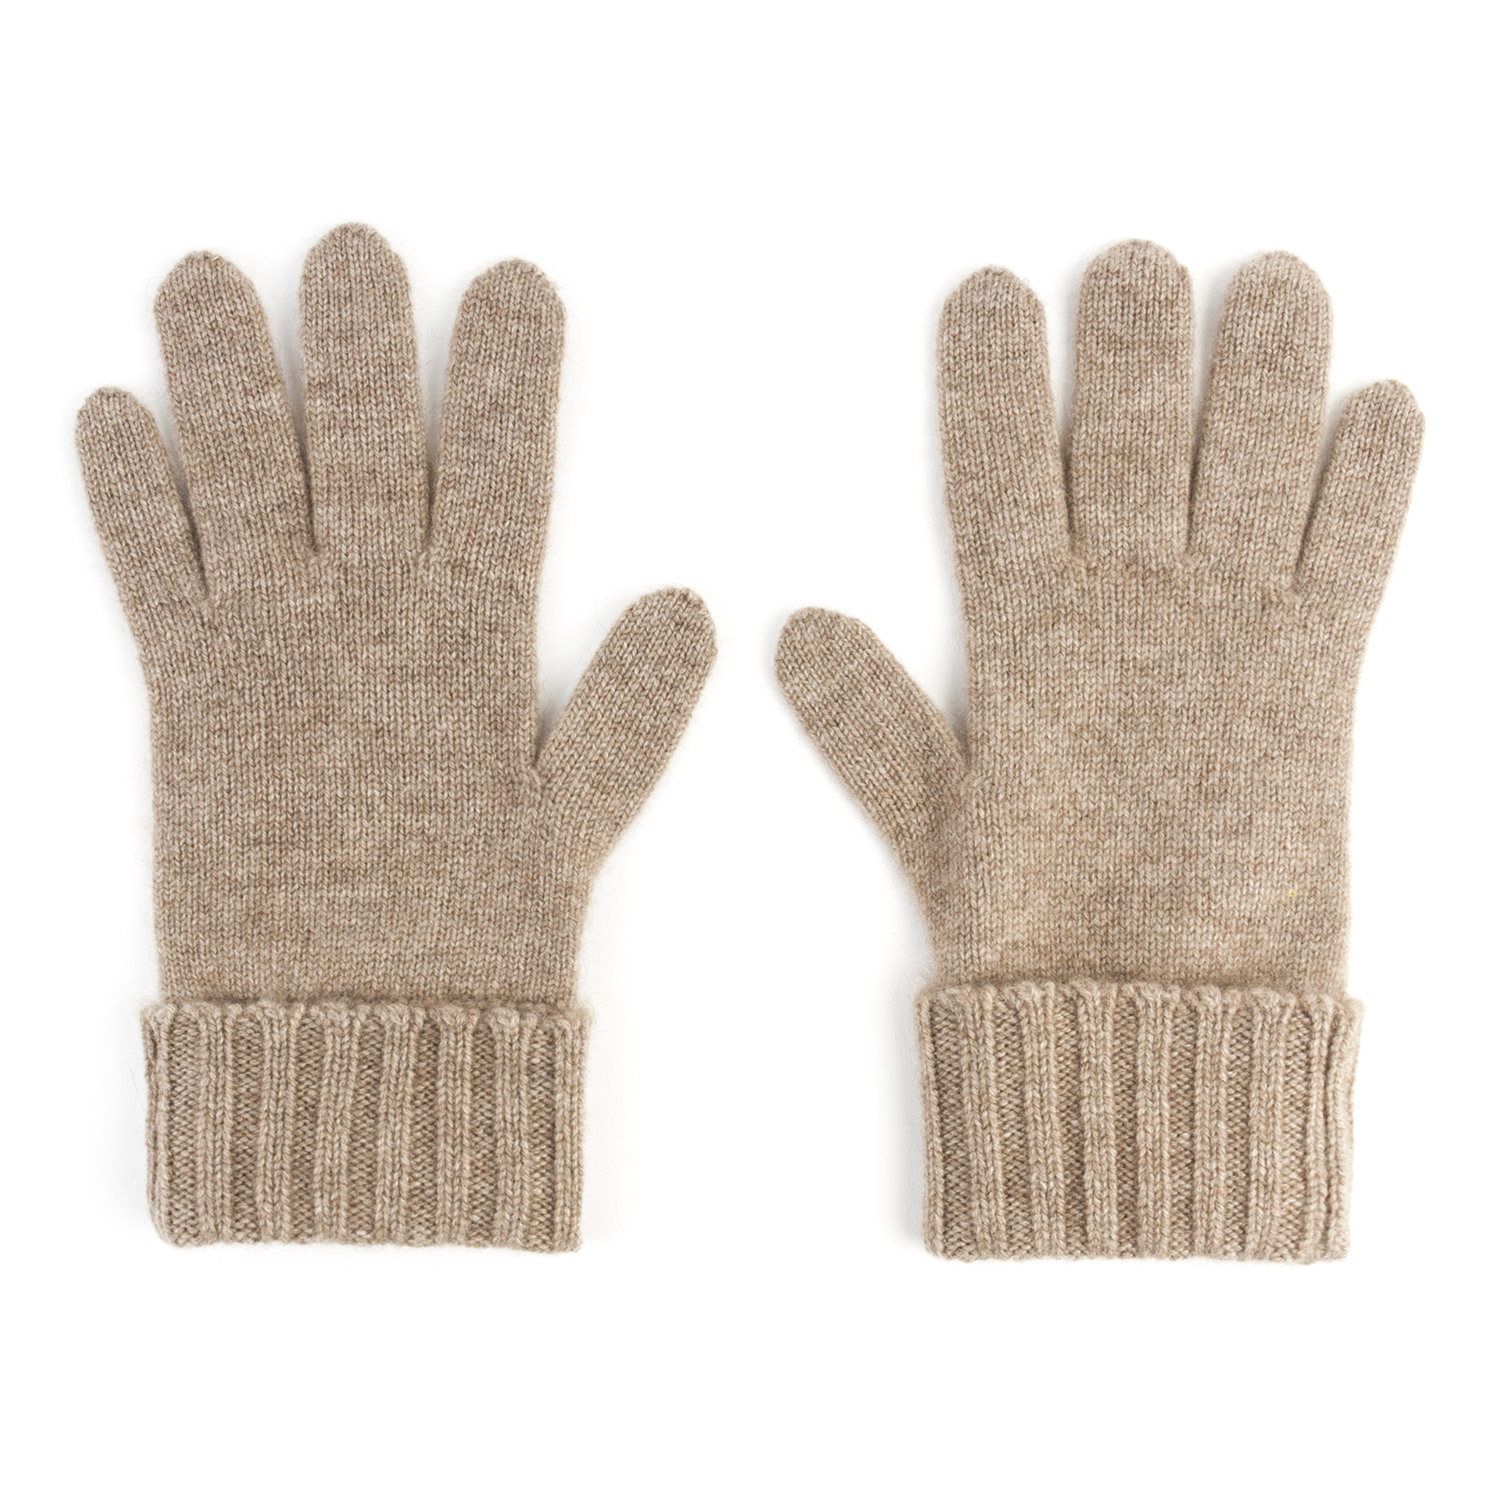 Knitted organic cashmere gloves | Bel 